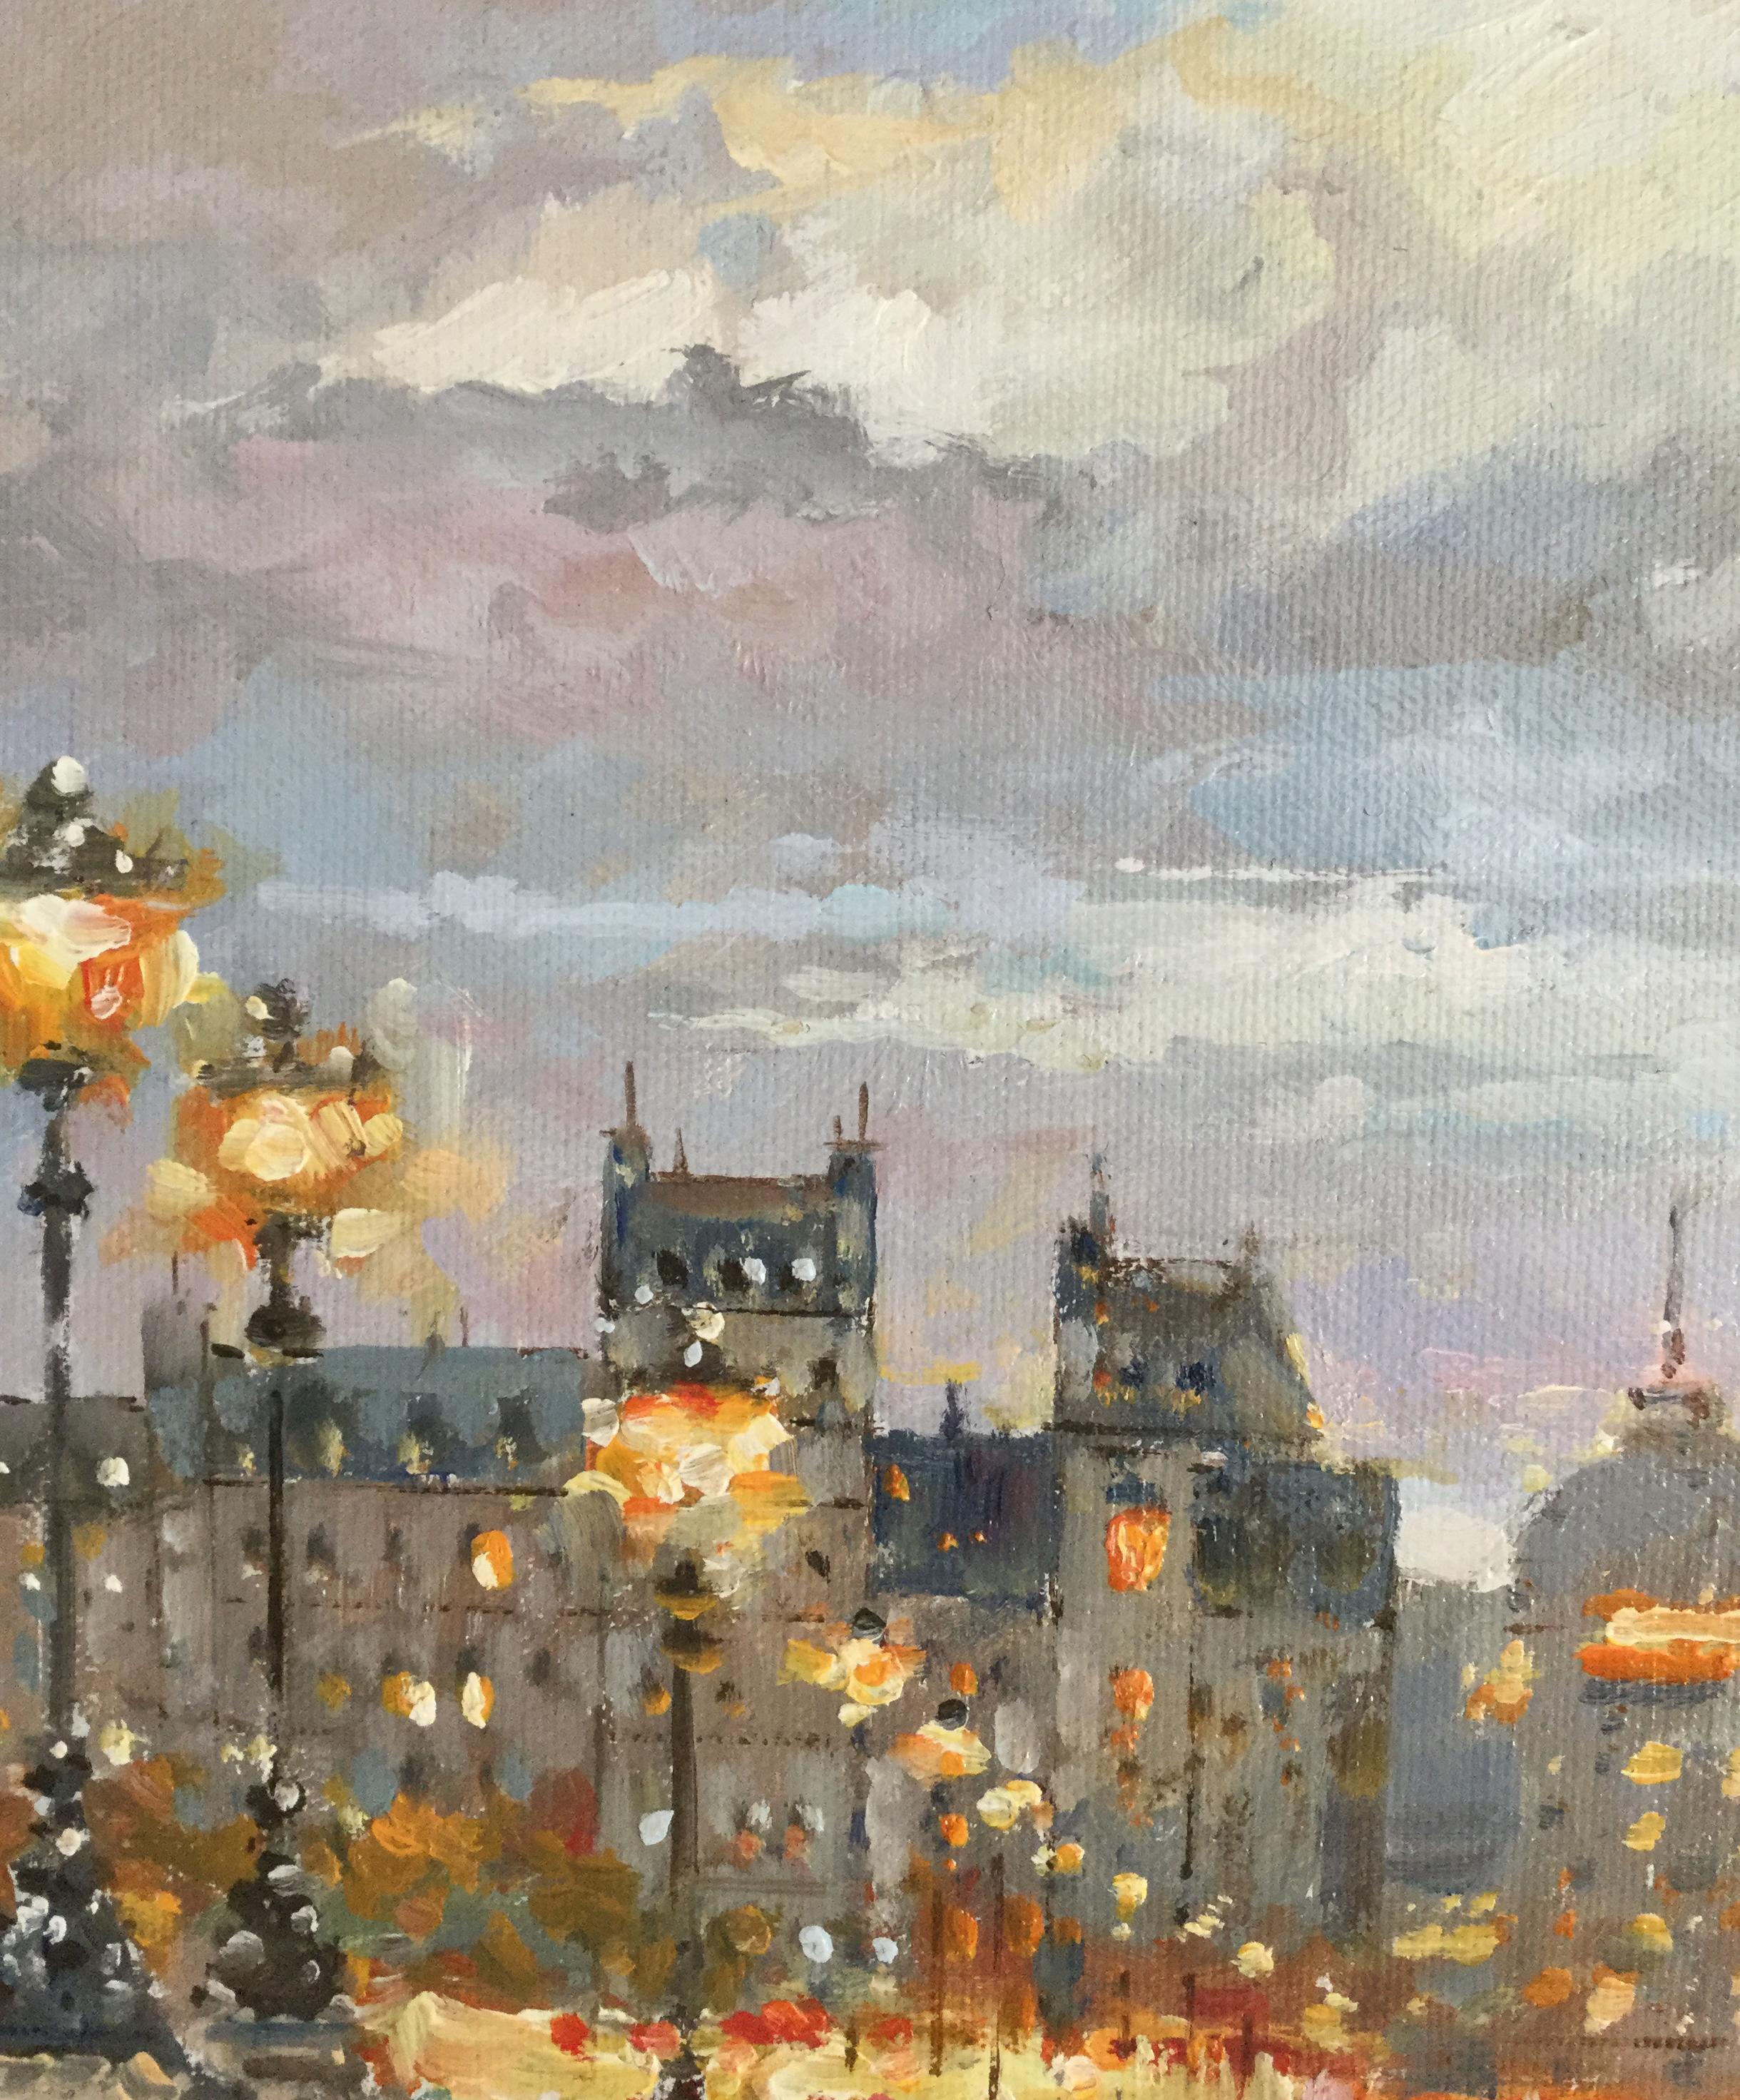 Brushed Milan Miletic 'Serbian', Pont Neuf Paris, Oil on Canvas, Dated, 2008 For Sale